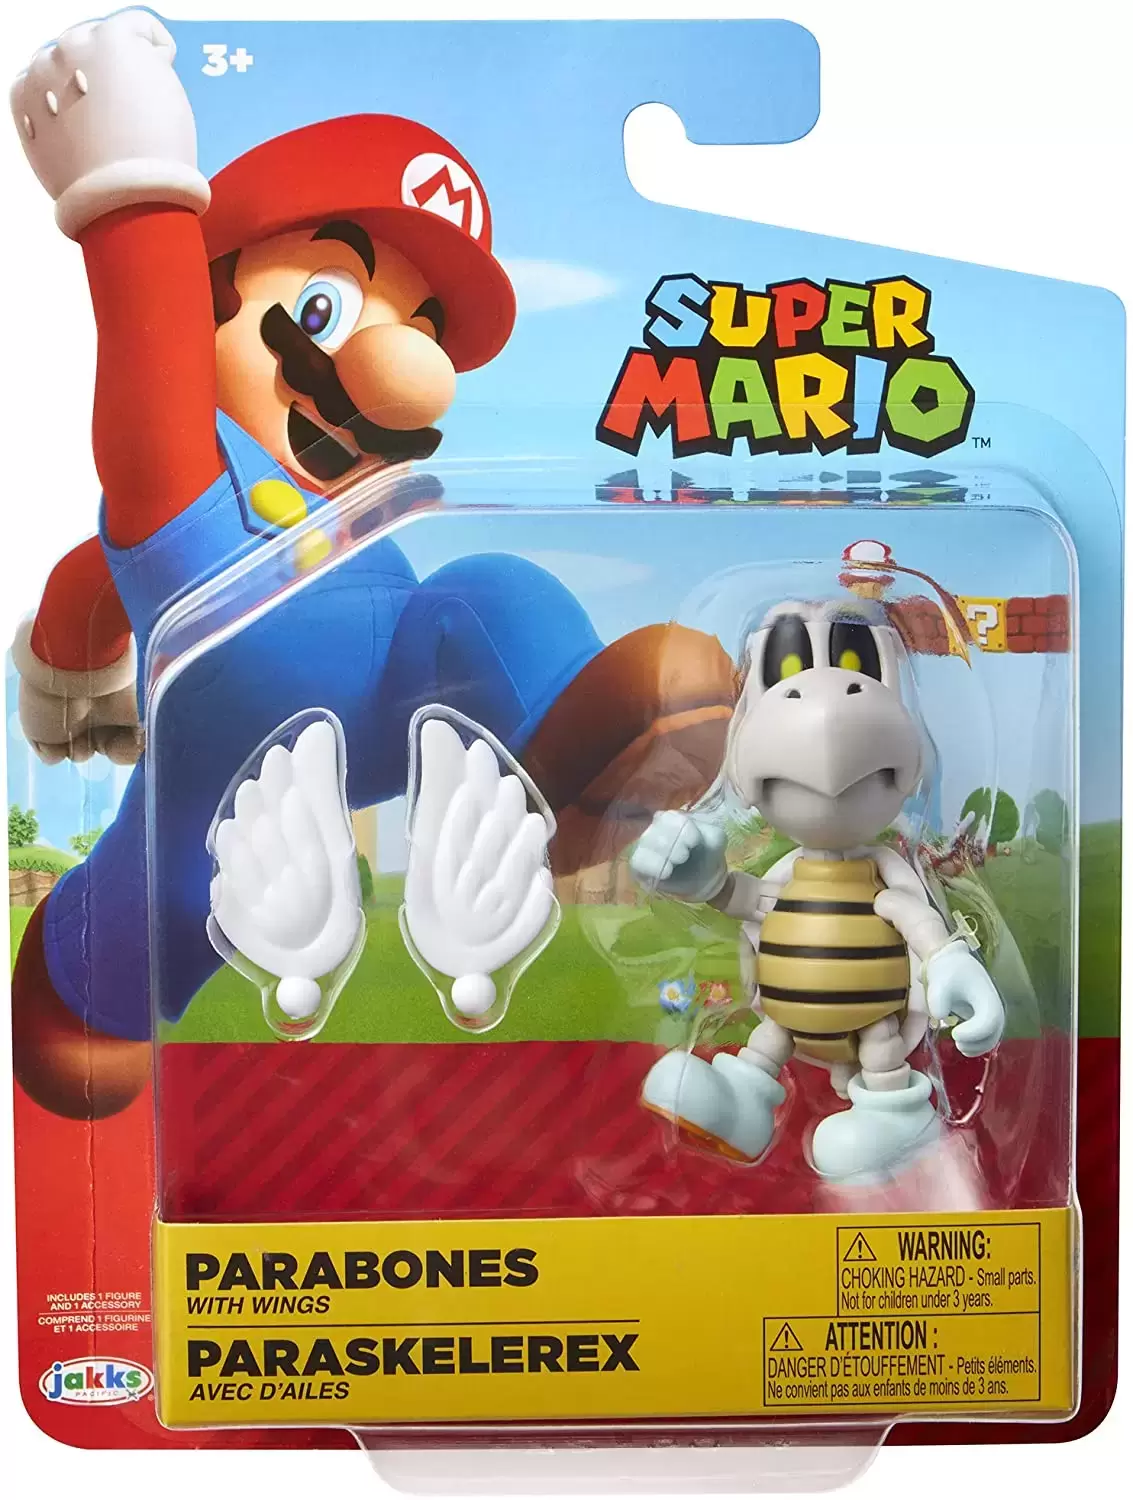 World of Nintendo - Parabones with wings